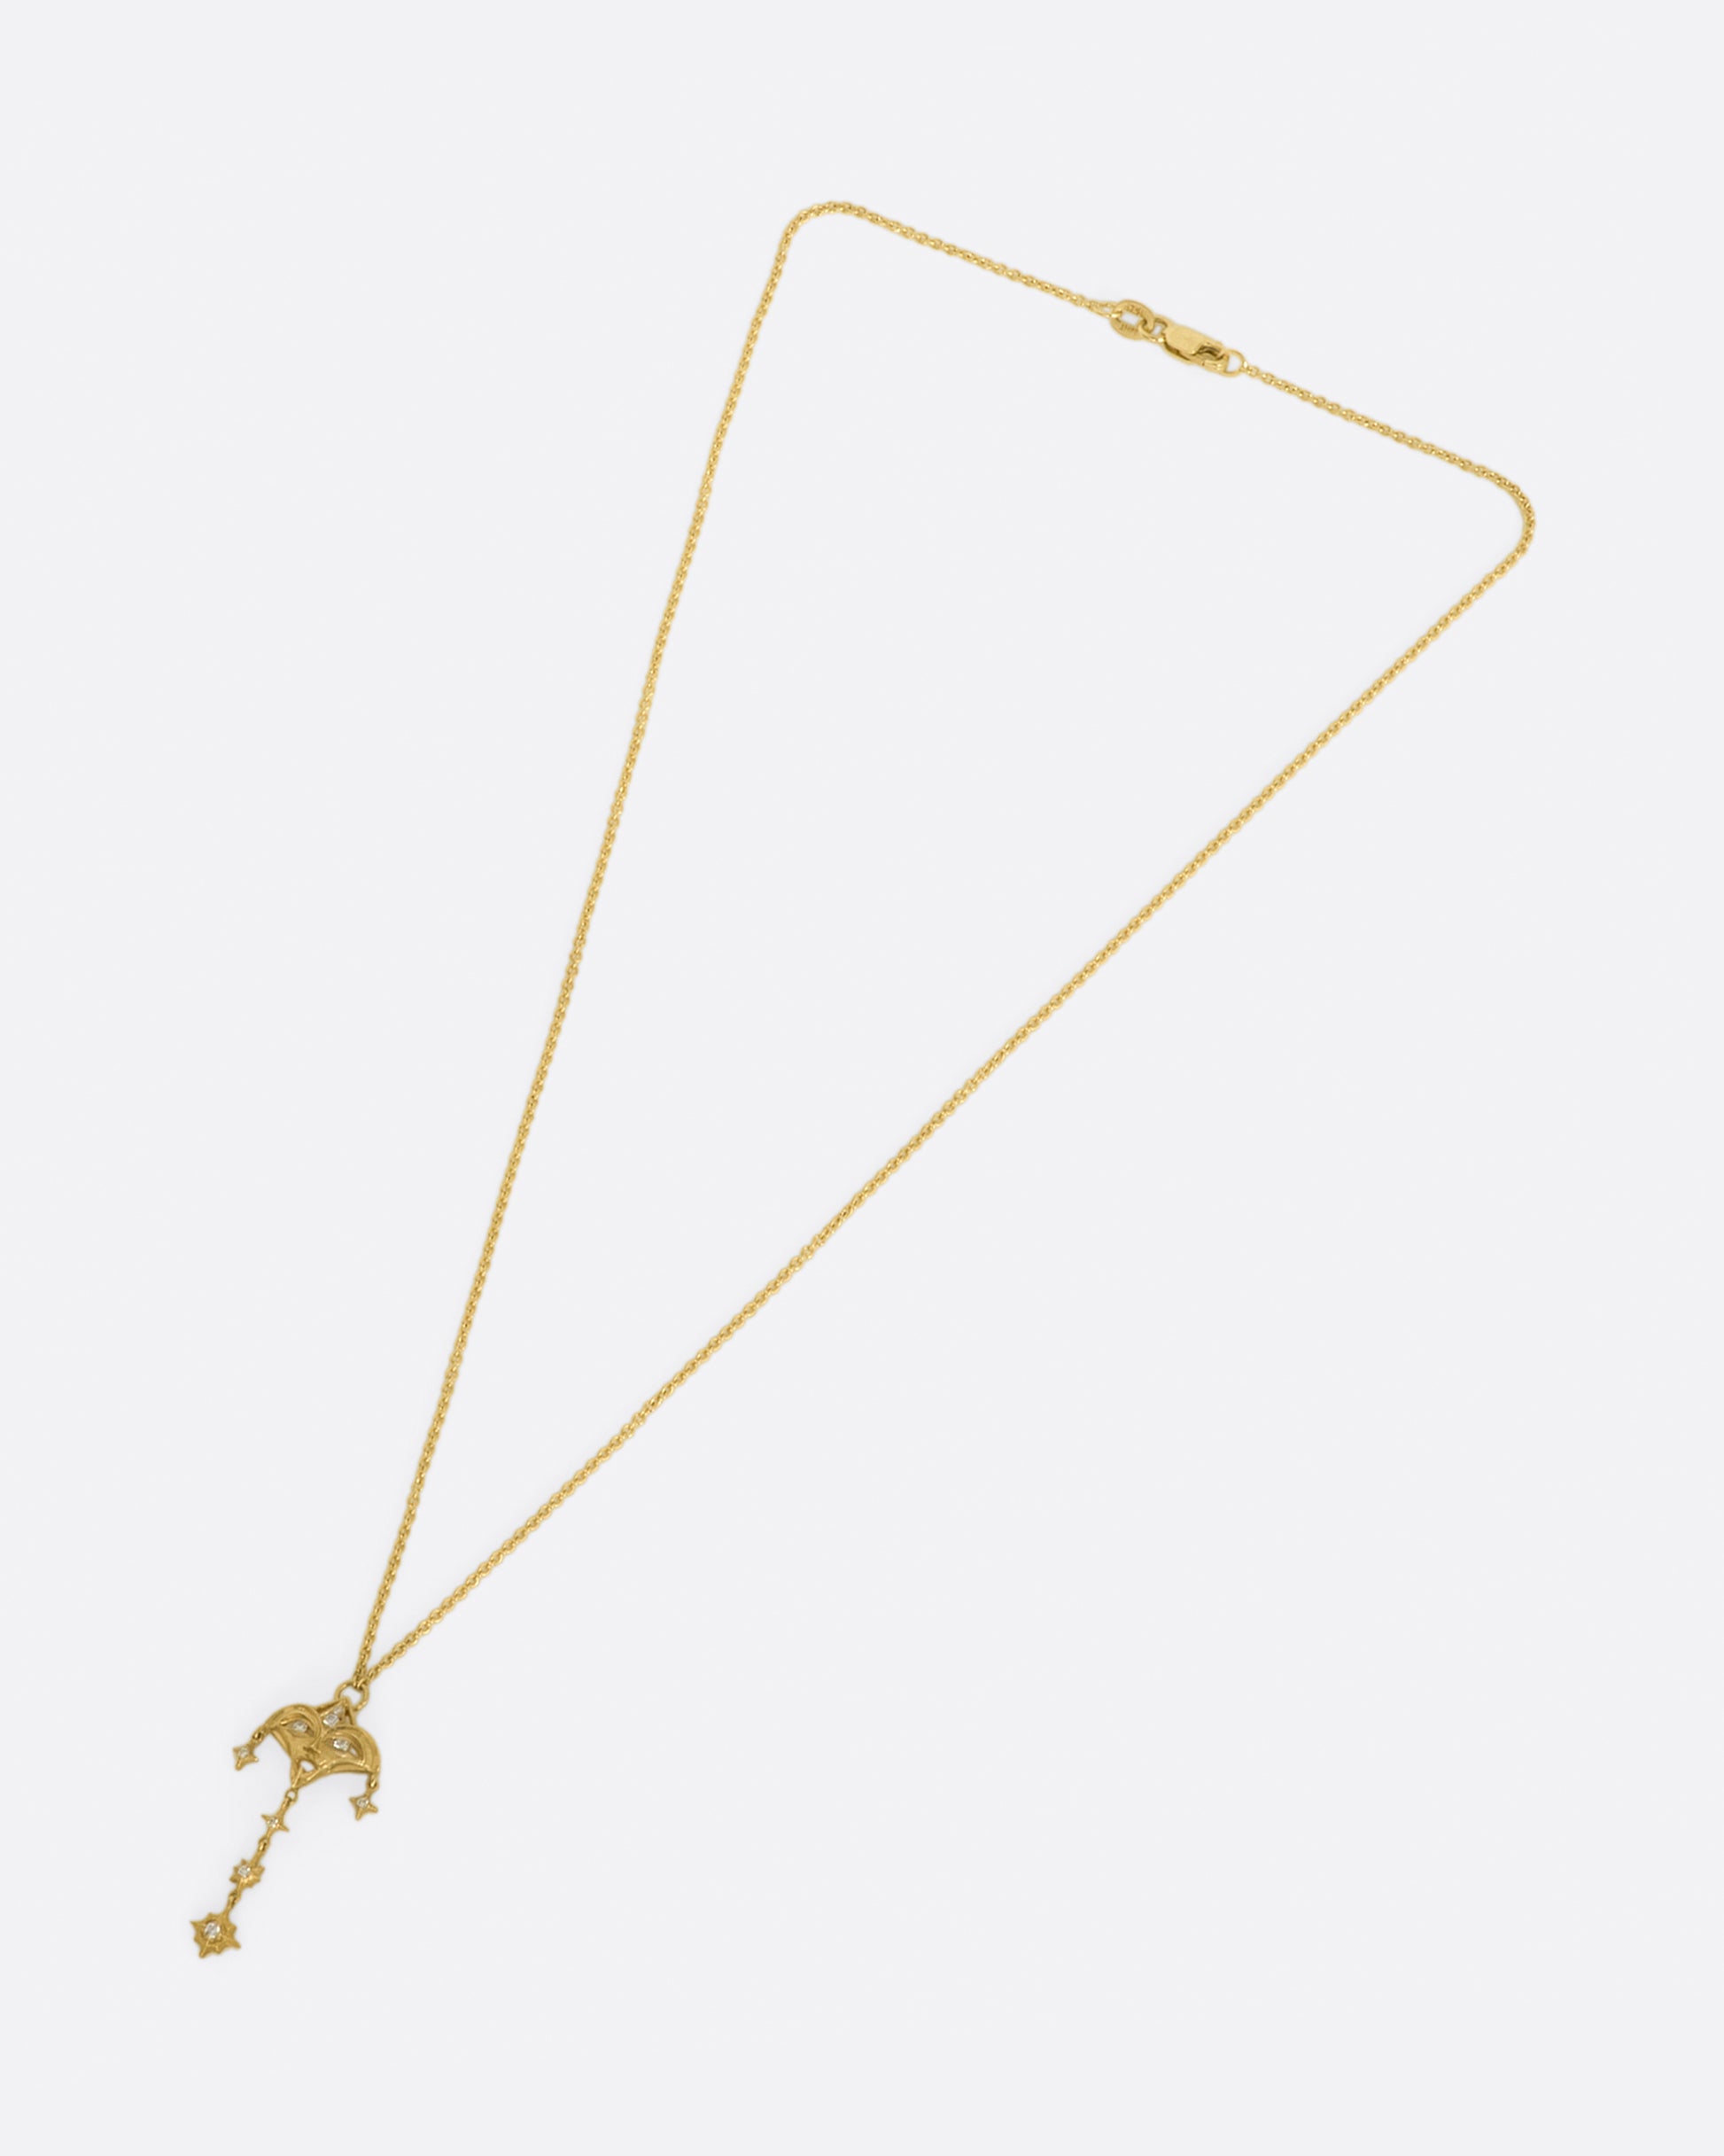 A yellow gold necklace with a mask pendant with diamond eyes and various star dangles.